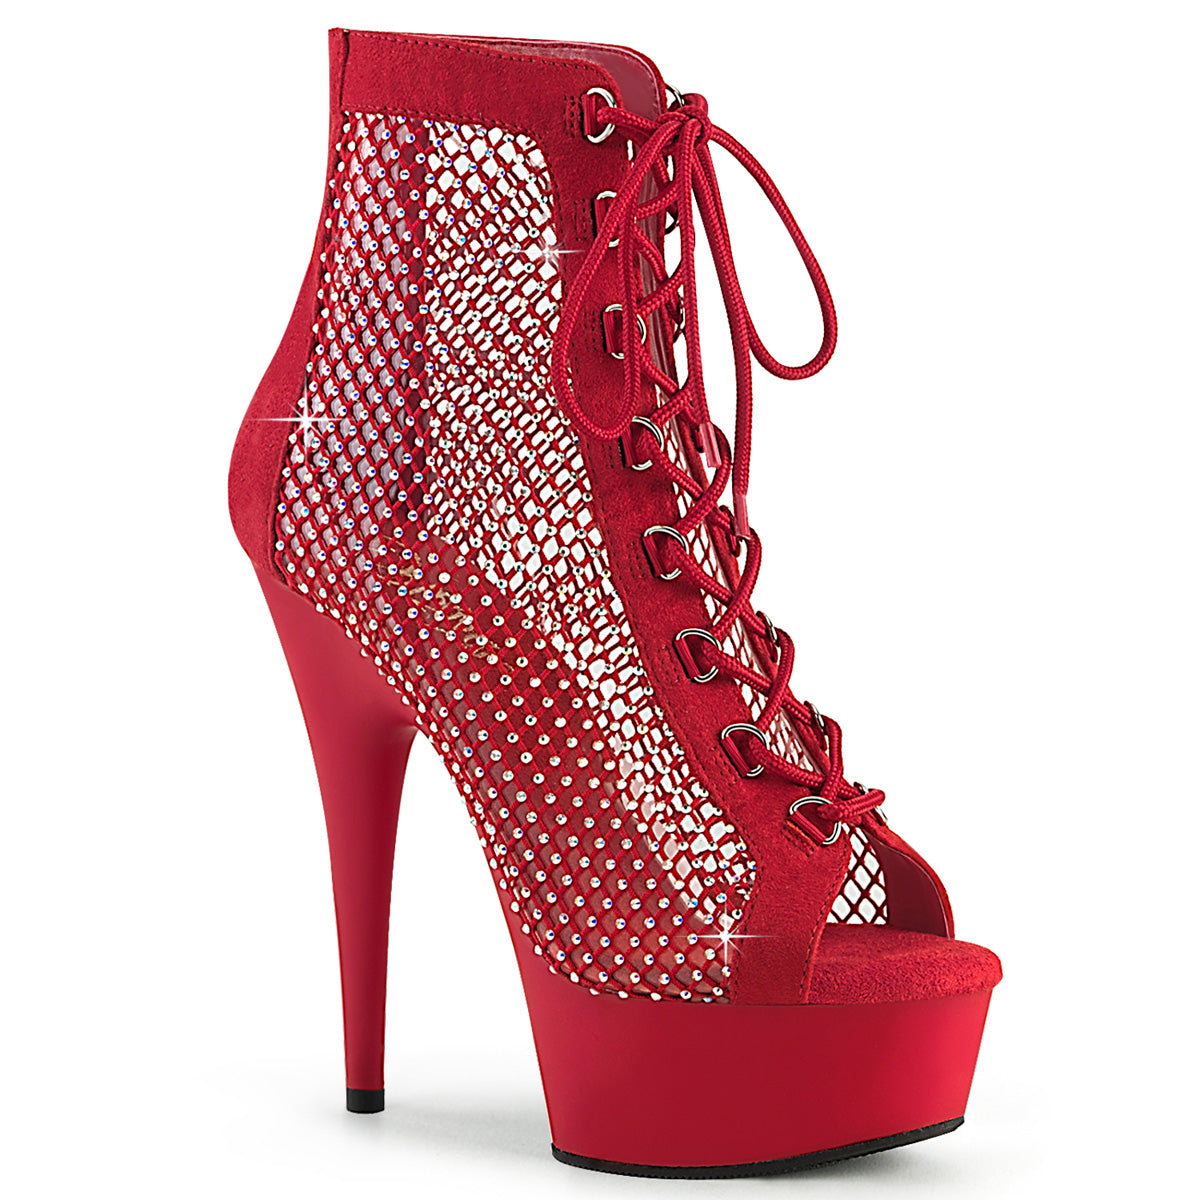 PLEASER DELIGHT-600-33RM RED PEEP TOE ANKLE BOOTS WITH RHINESTONE MESH SIZE 8 USA SALE